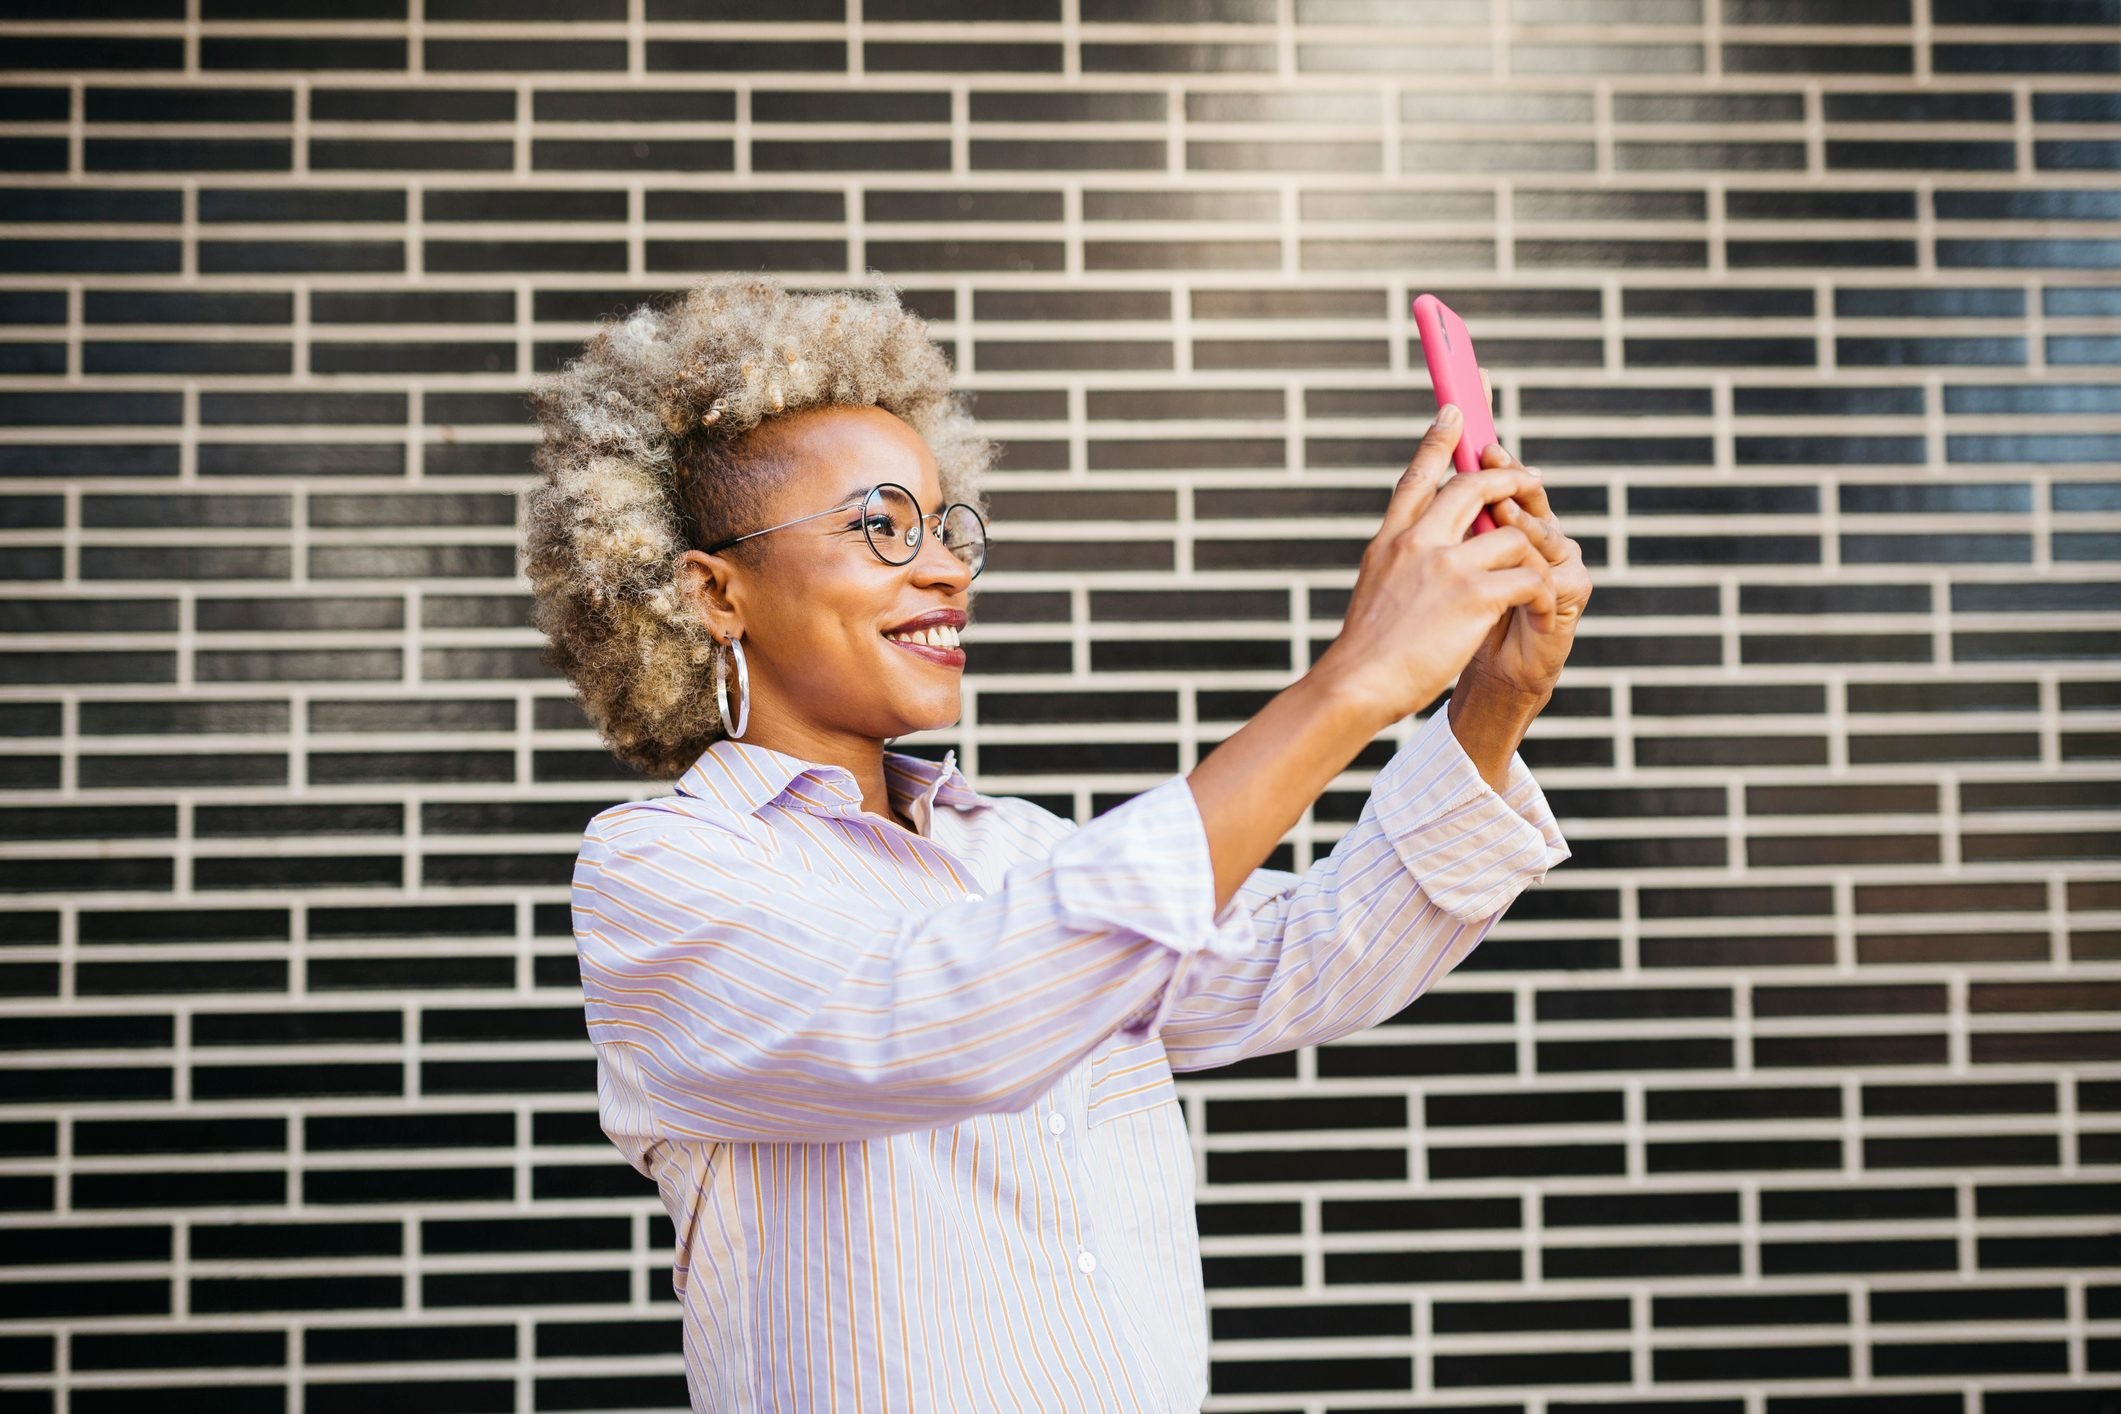 How to Take a Selfie: 19 Tips from the Pros for the Best Selfies Ever